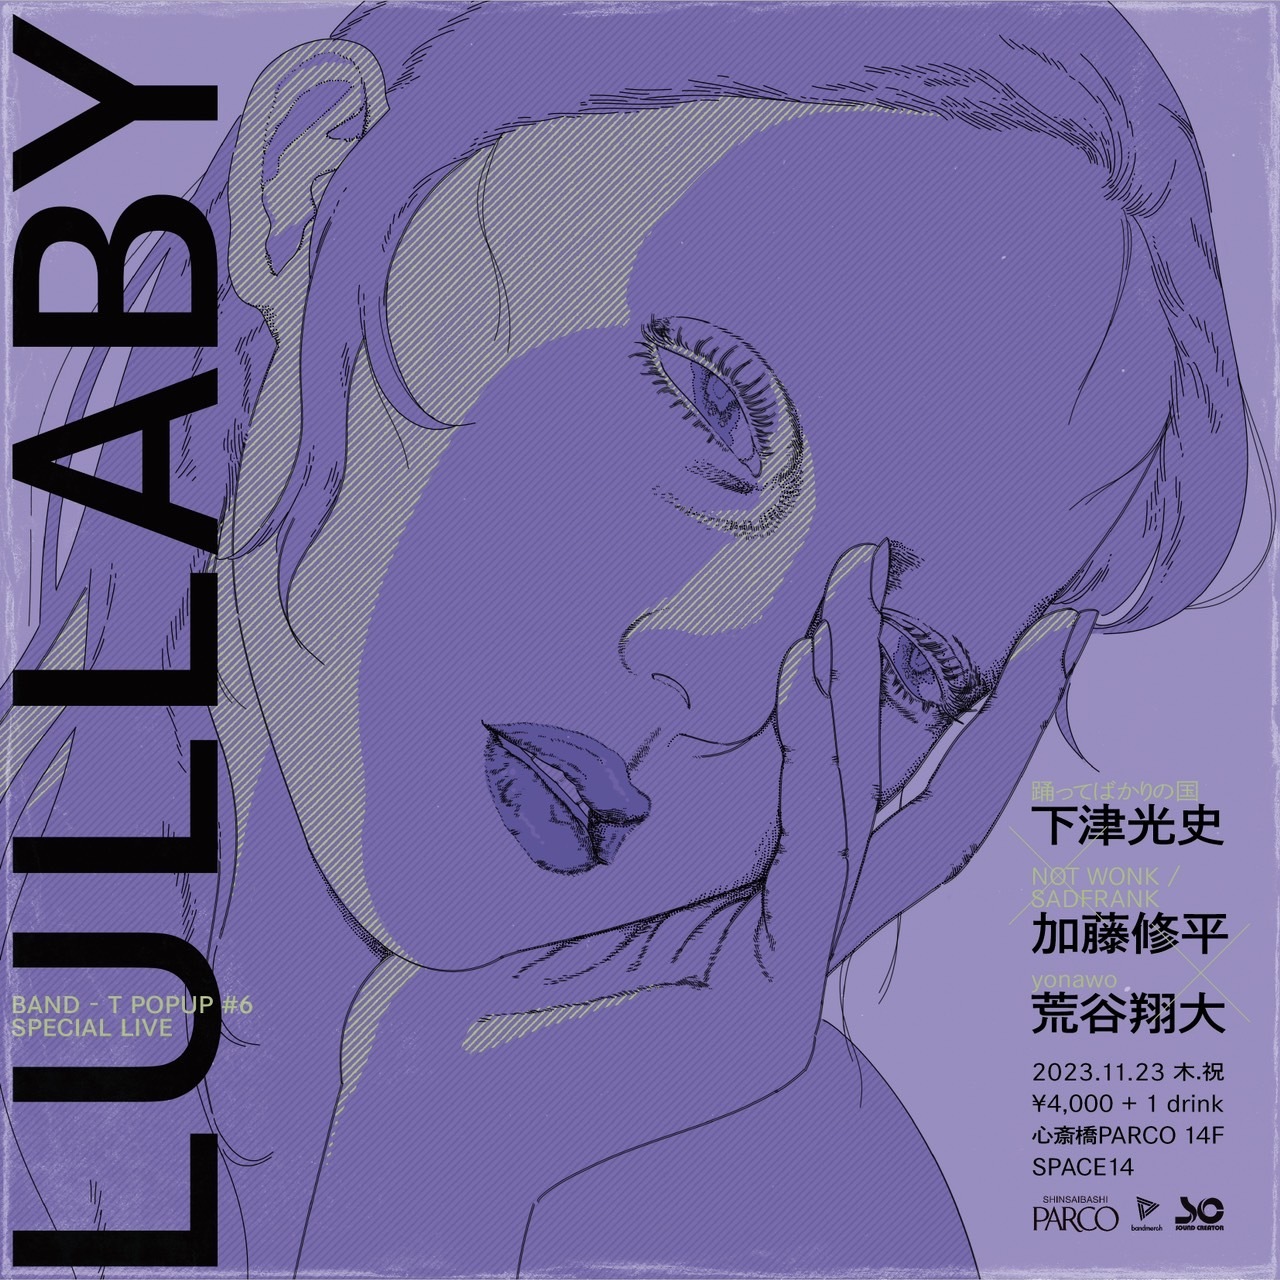 「Lullaby - BAND-T POPUP #6 SPECIAL LIVE」11月23日（木・祝）＠14F・SPACE14